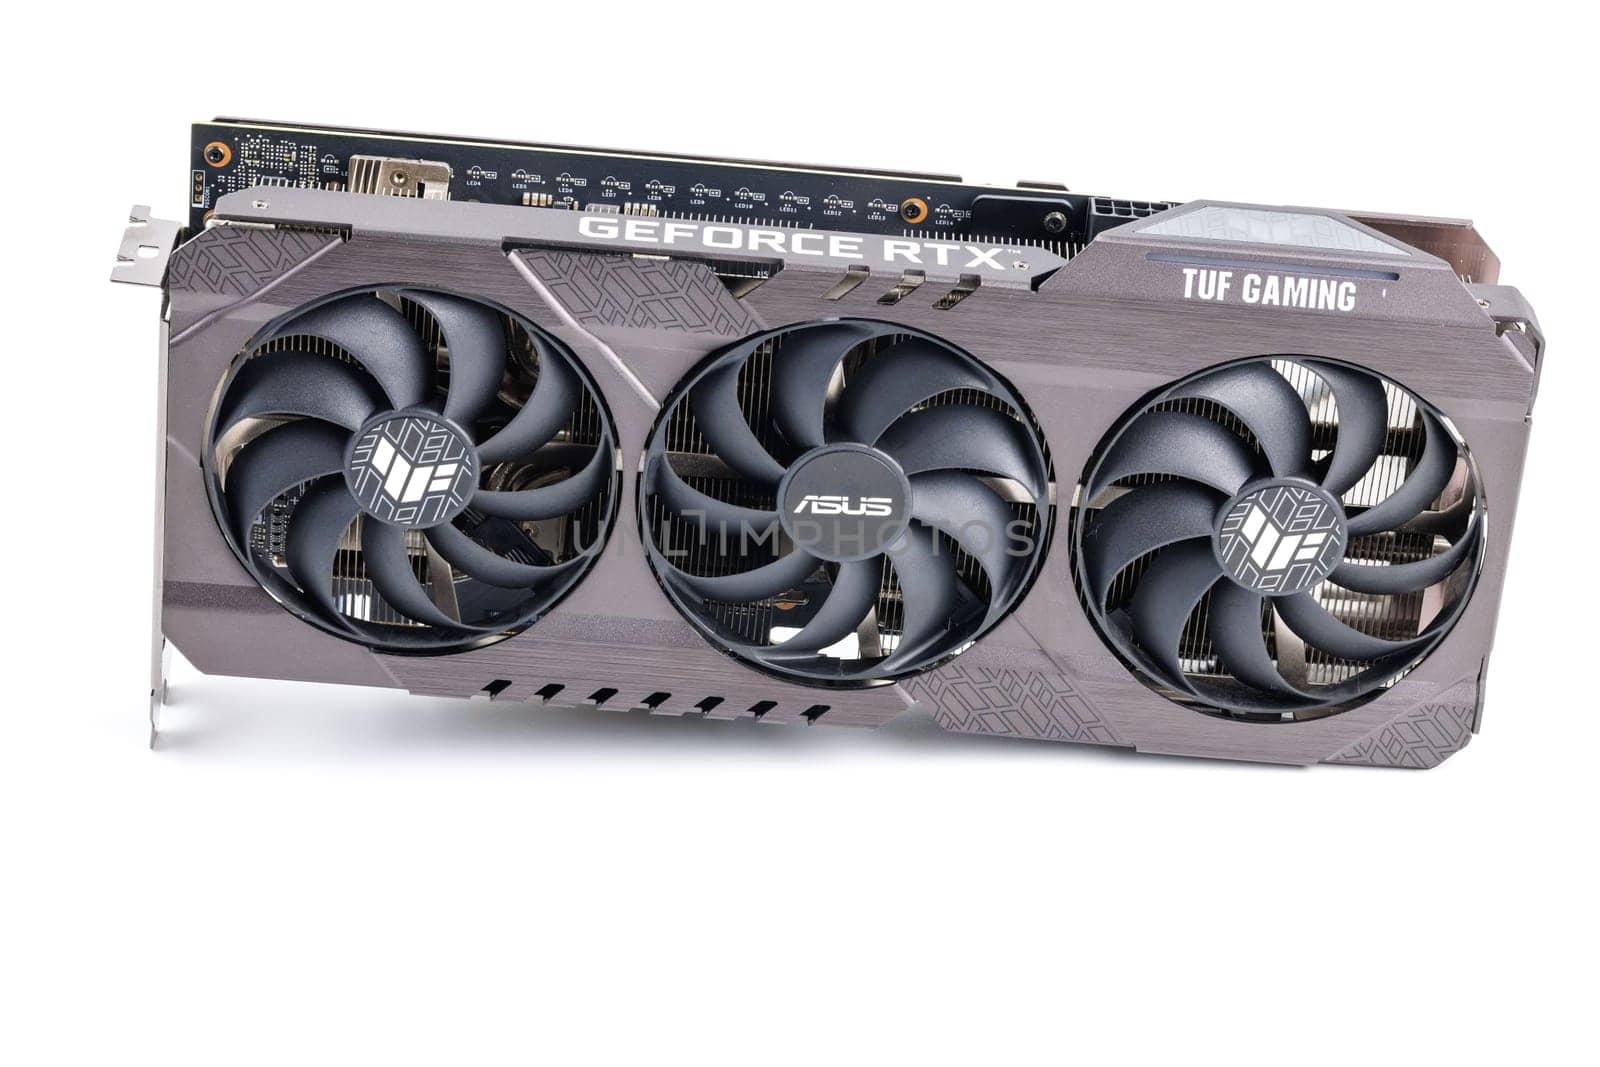 NVIDIA RTX 3060 OC 12g TUF Gaming graphics card on white background by z1b